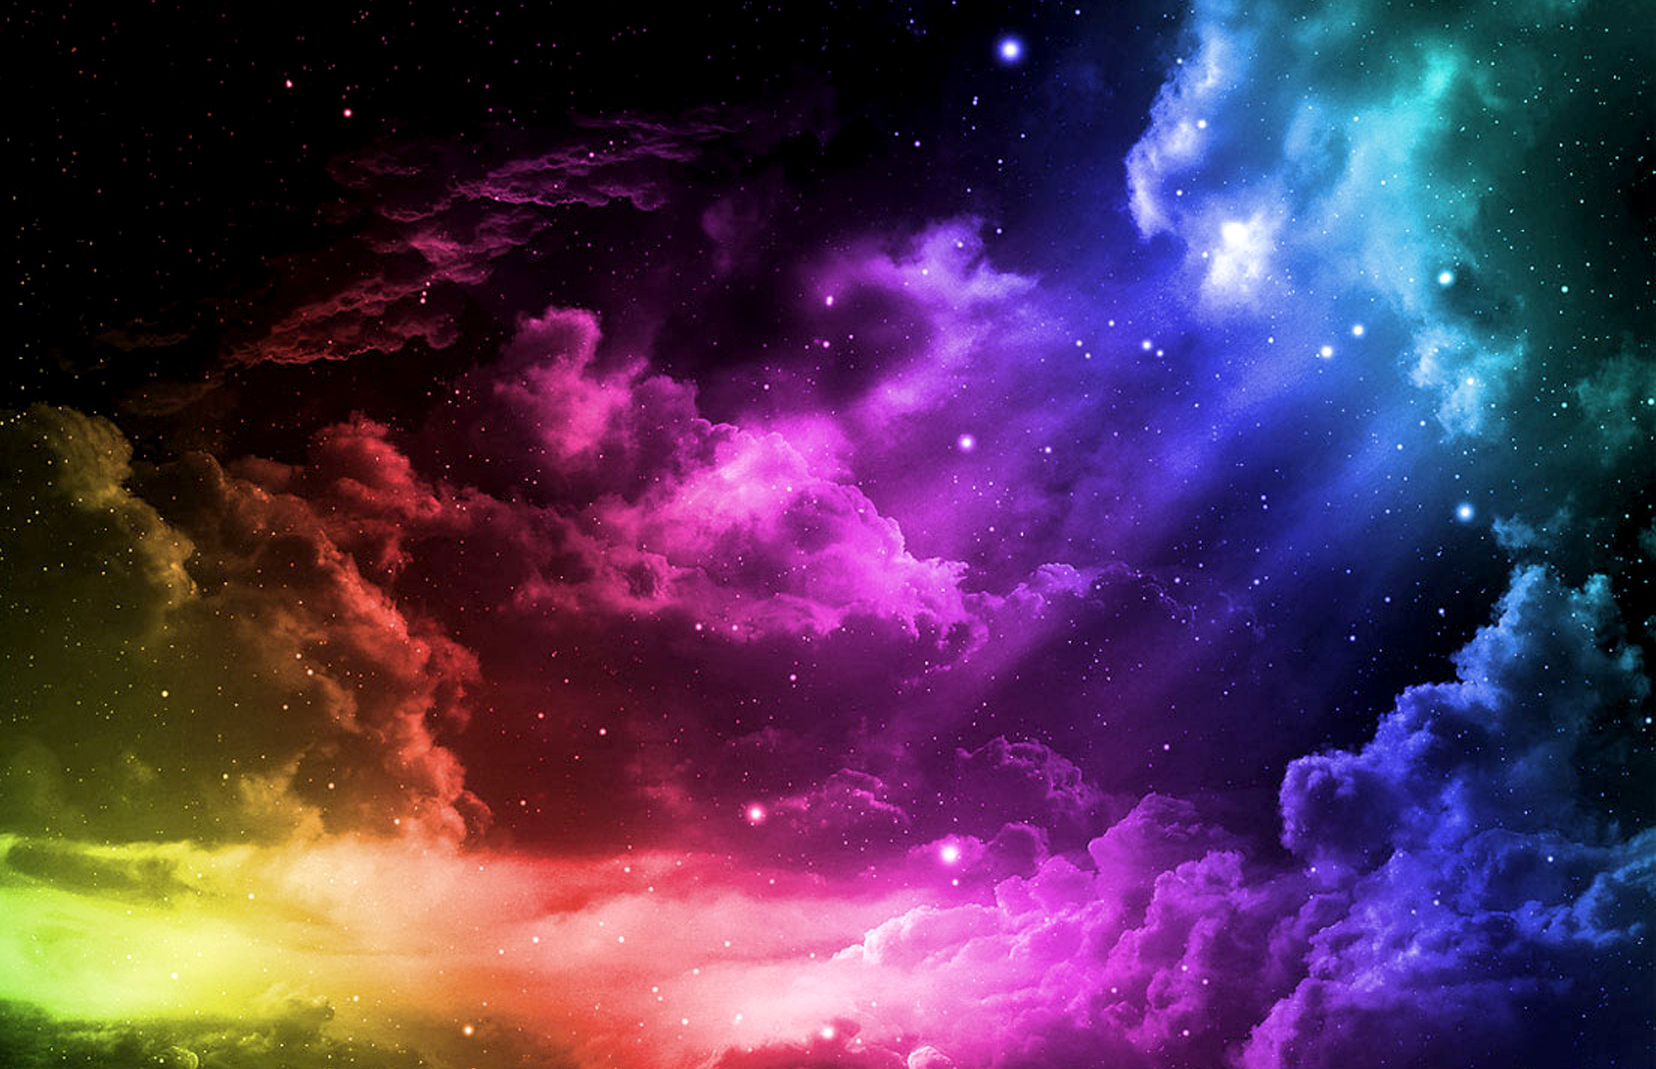 colorful wallpaper tumblr,sky,nature,outer space,nebula,atmosphere